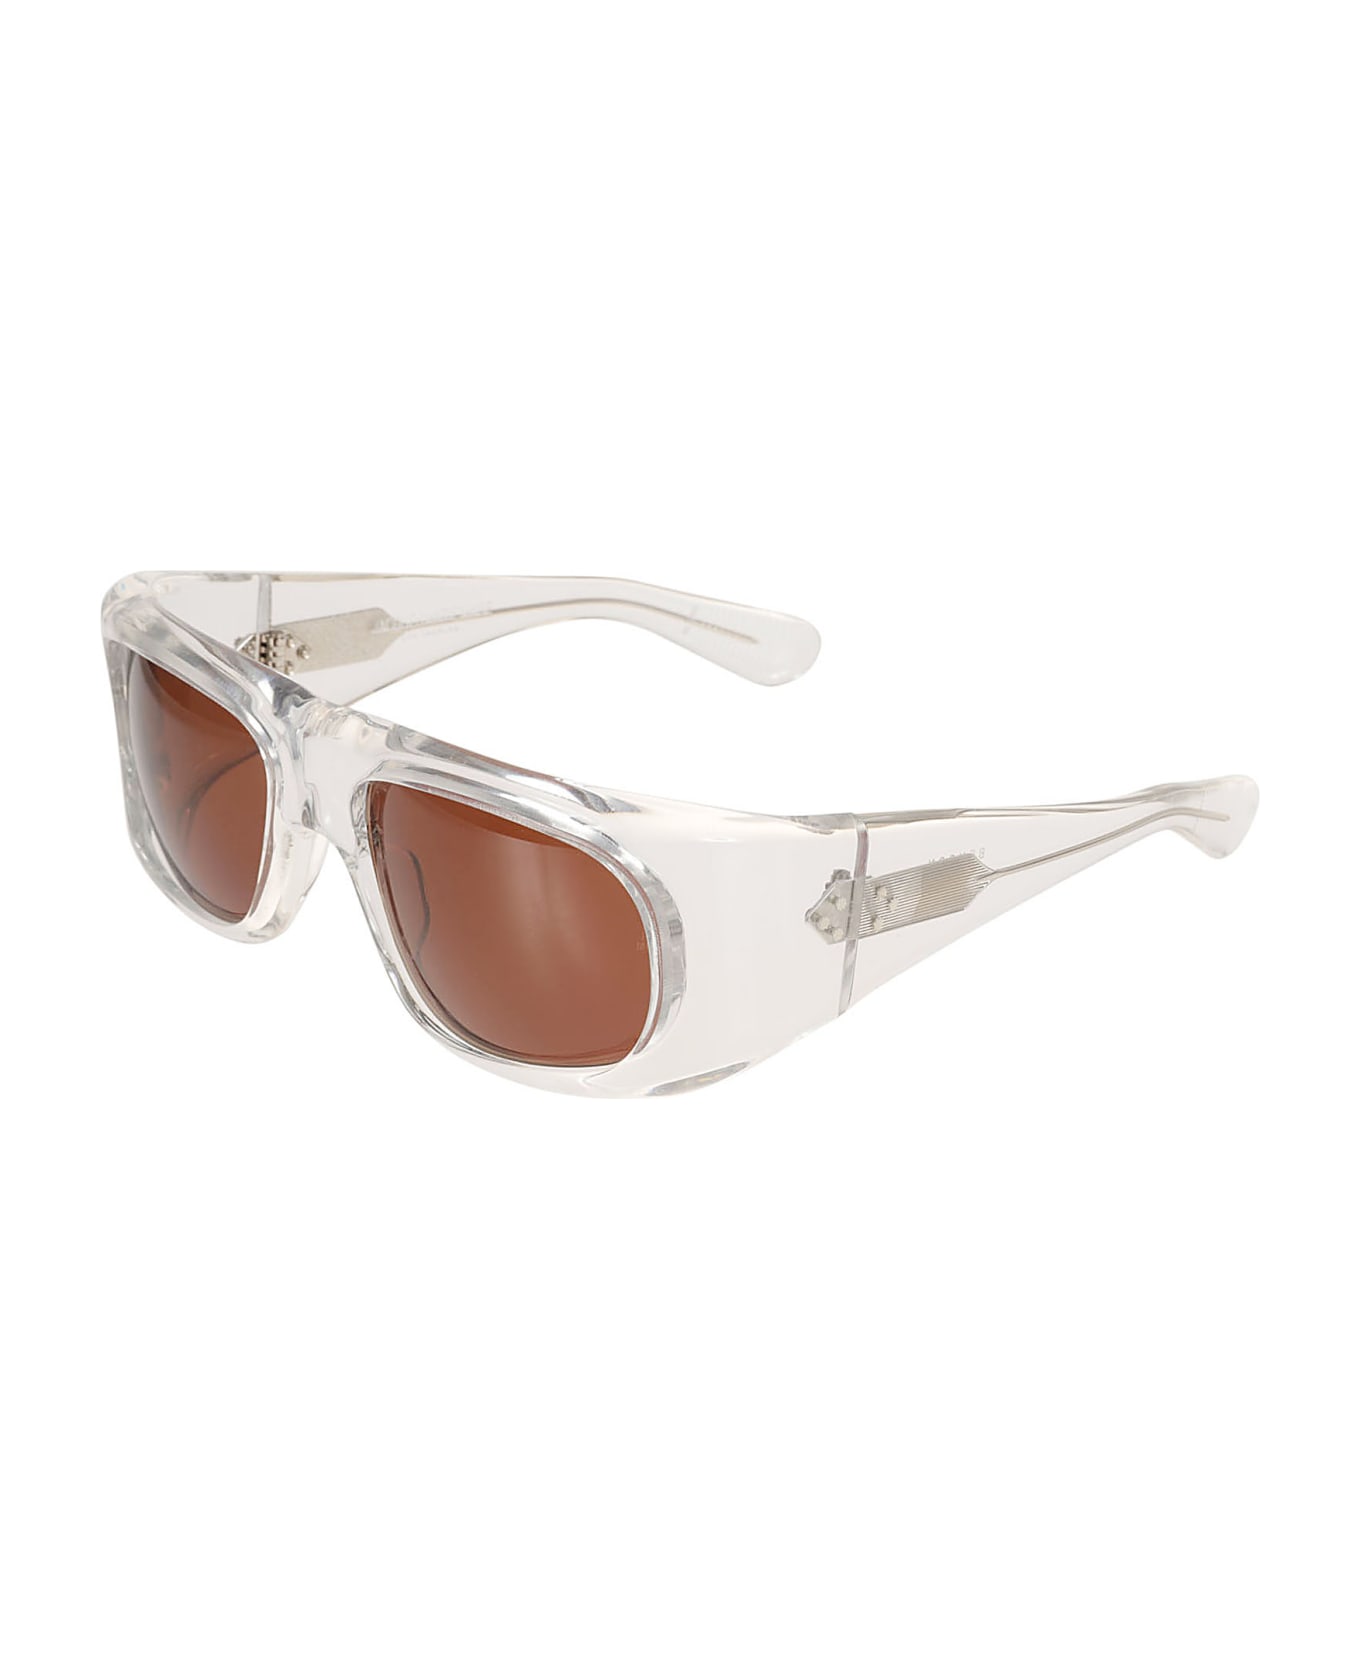 Jacques Marie Mage Benson Sunglasses - sienna